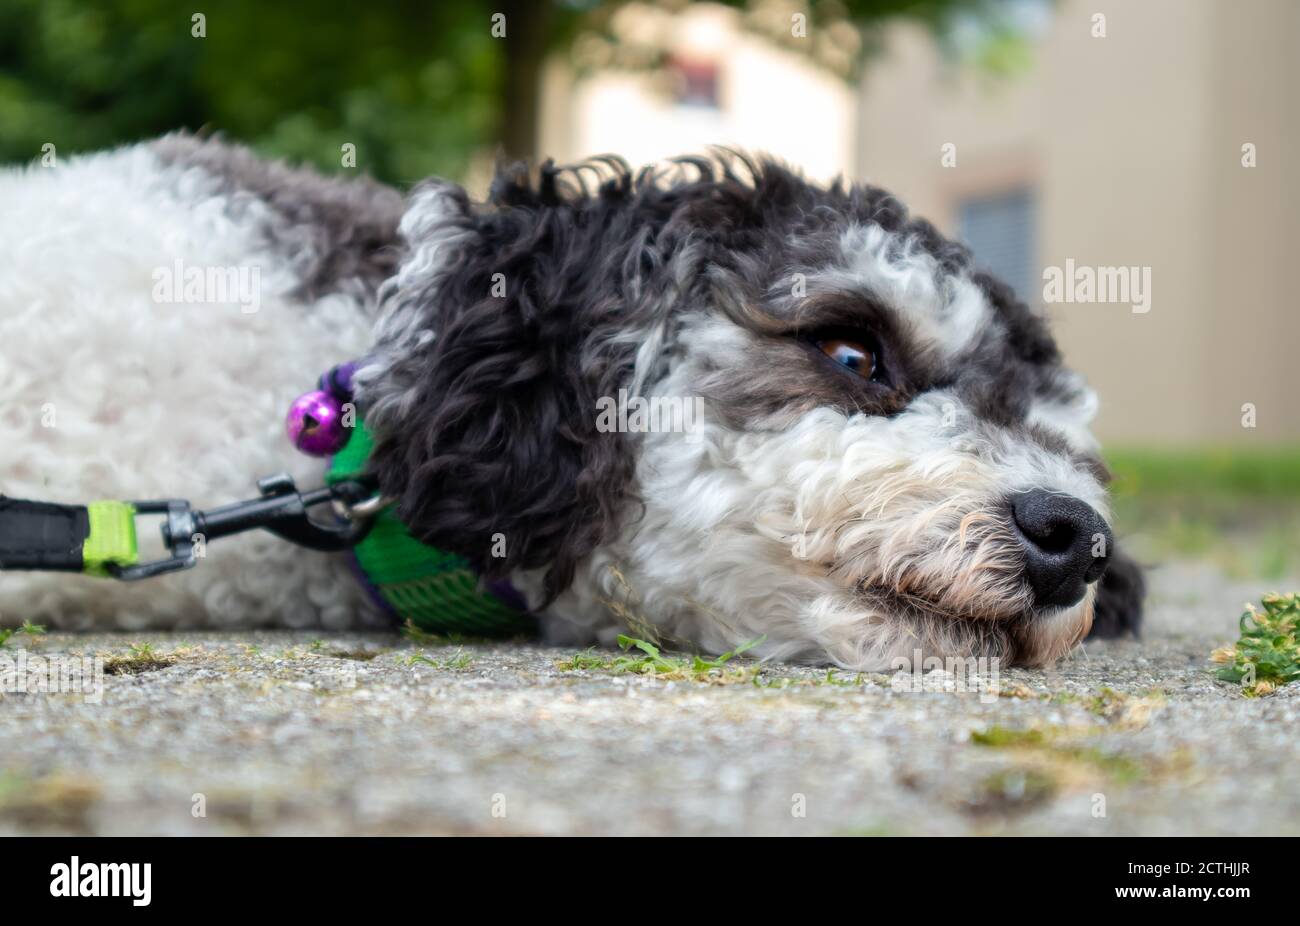 Close up of dog face. Dog resting head on the ground outside. Black and white miniature poodle looking at something out of view. Selective focus, blur Stock Photo